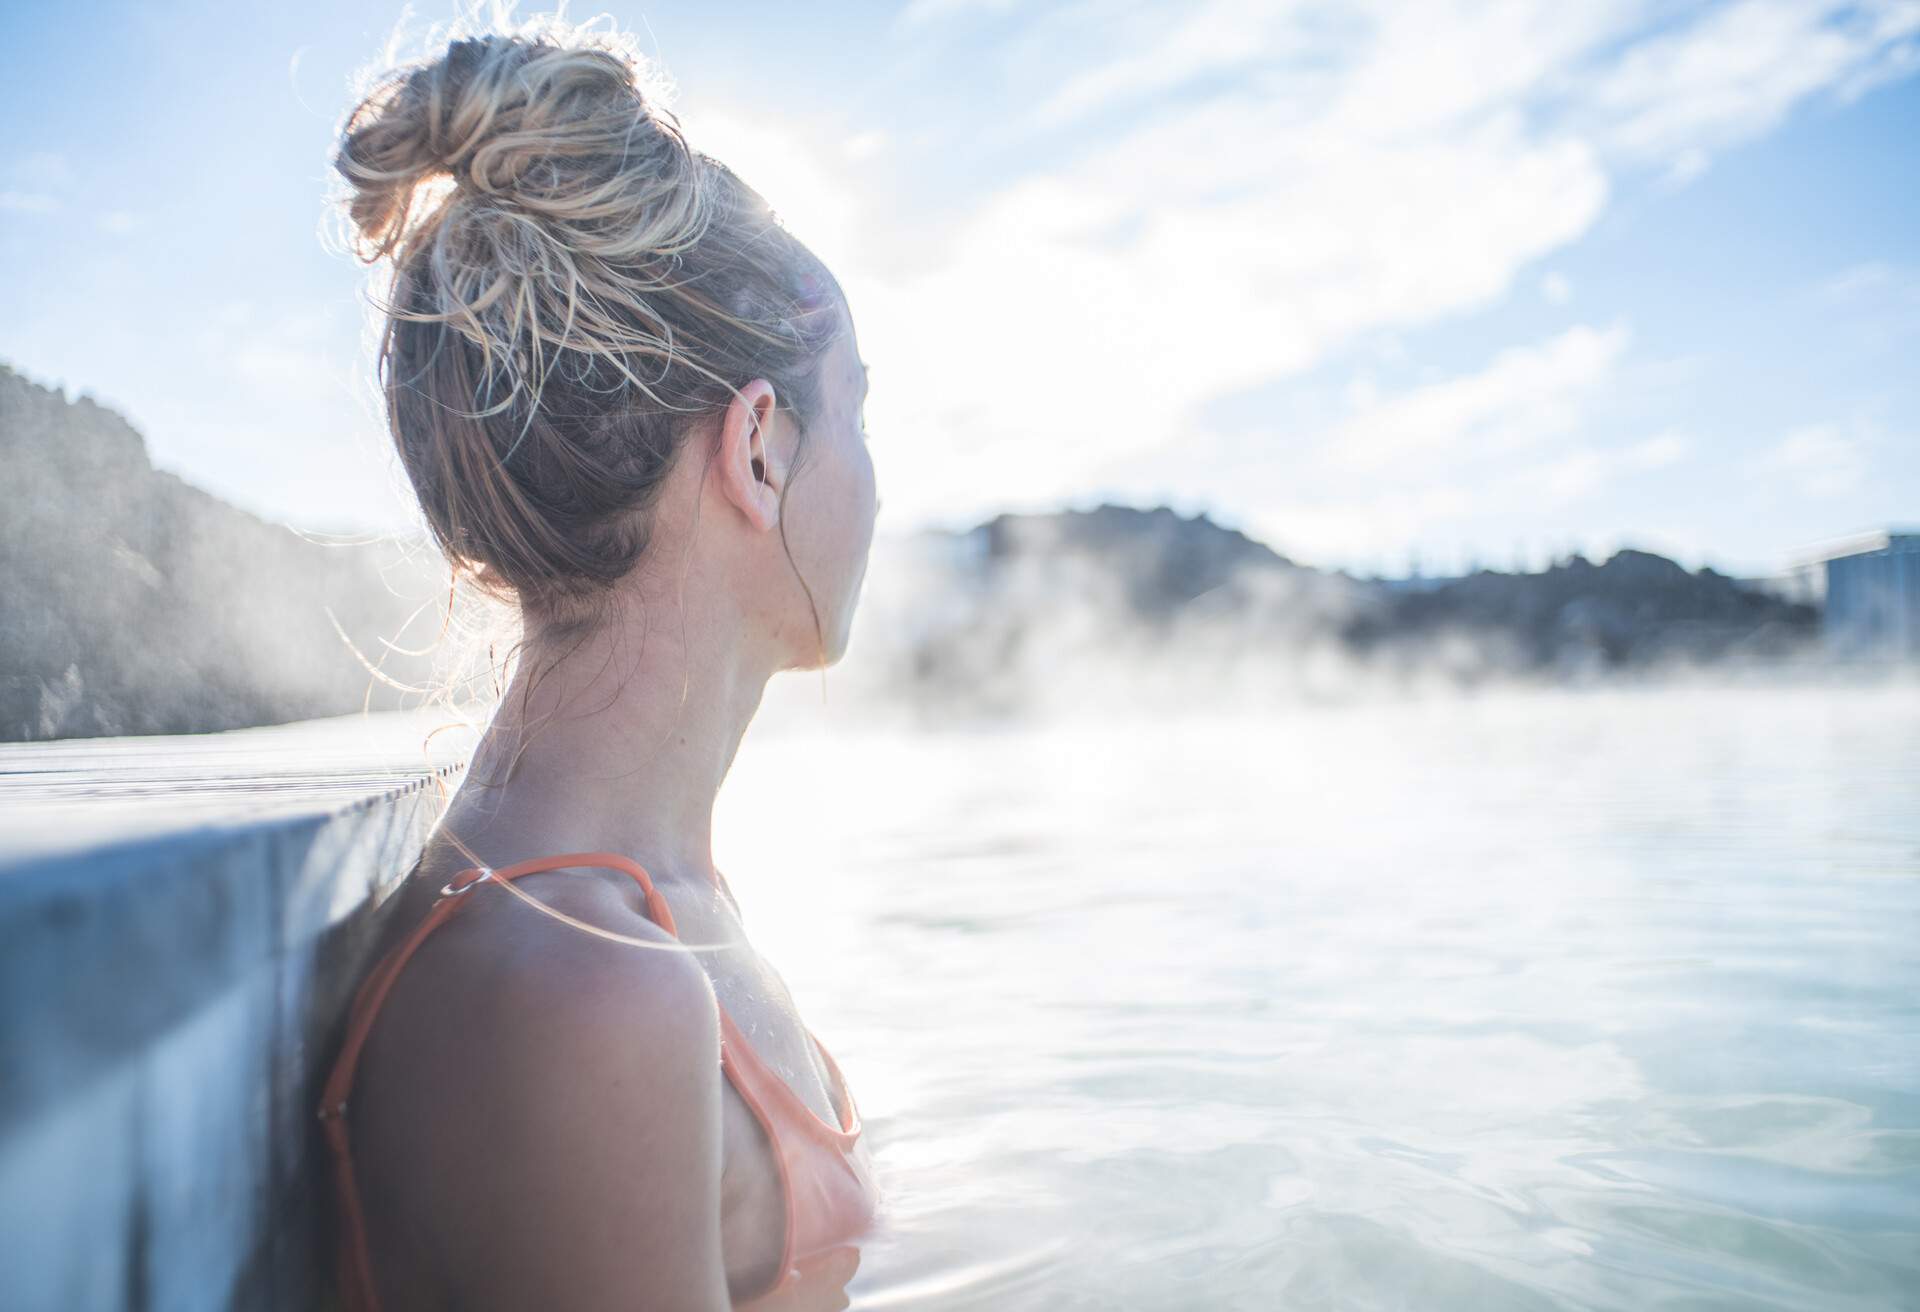 Geothermal spa. Woman relaxing in hot spring pool in Iceland. Girl enjoying bathing in a blue water lagoon Icelandic tourist attraction.